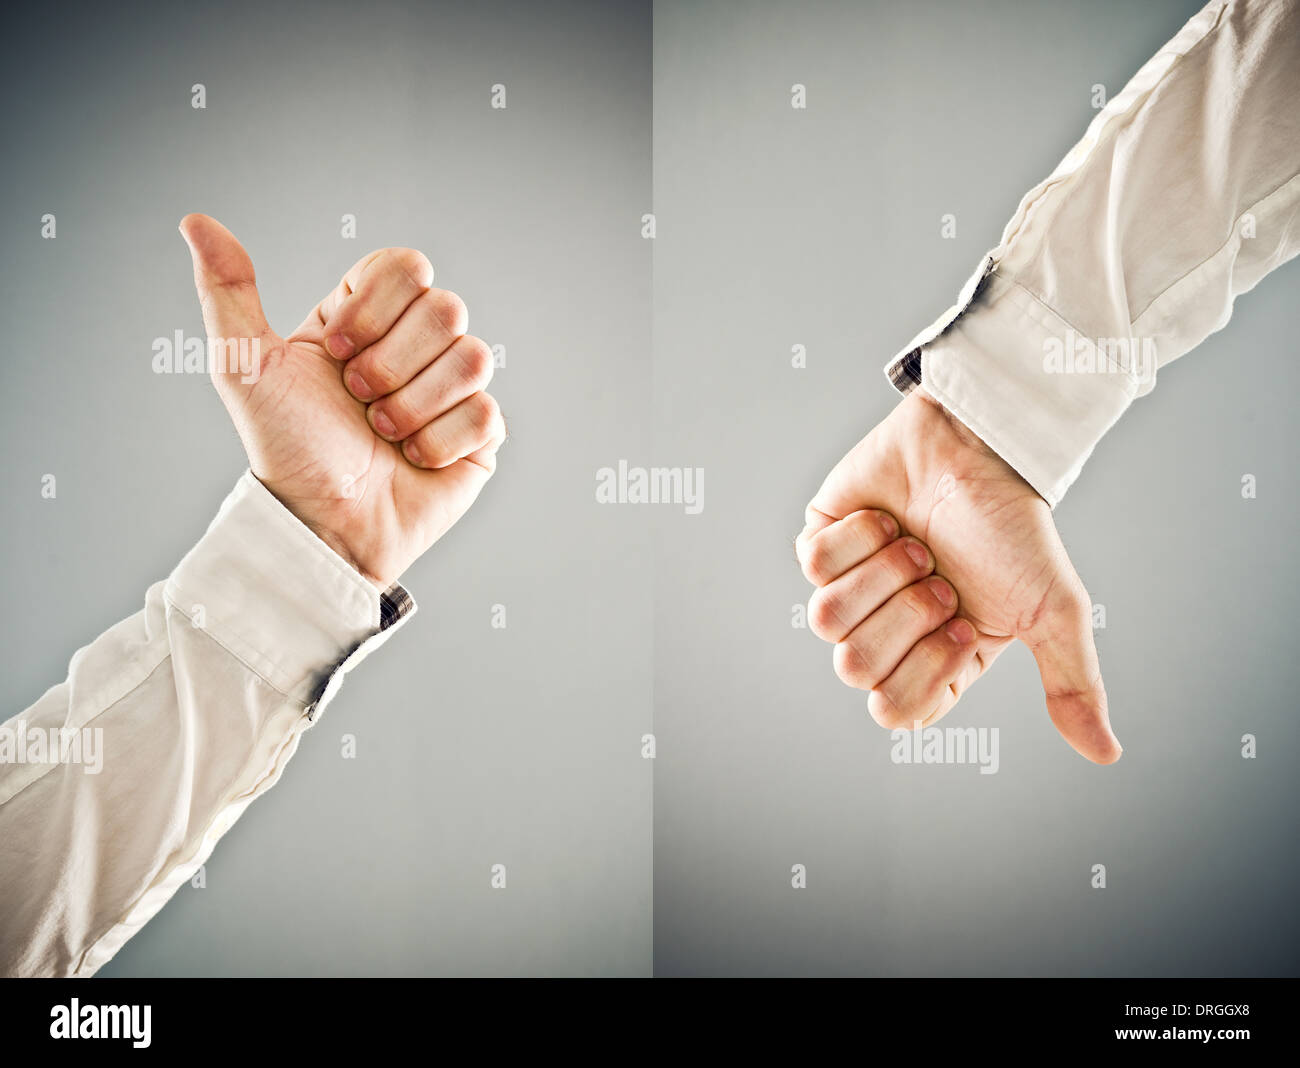 Businessman showing thumb down and thumb up symbol. Approval and disapproval concept. Stock Photo